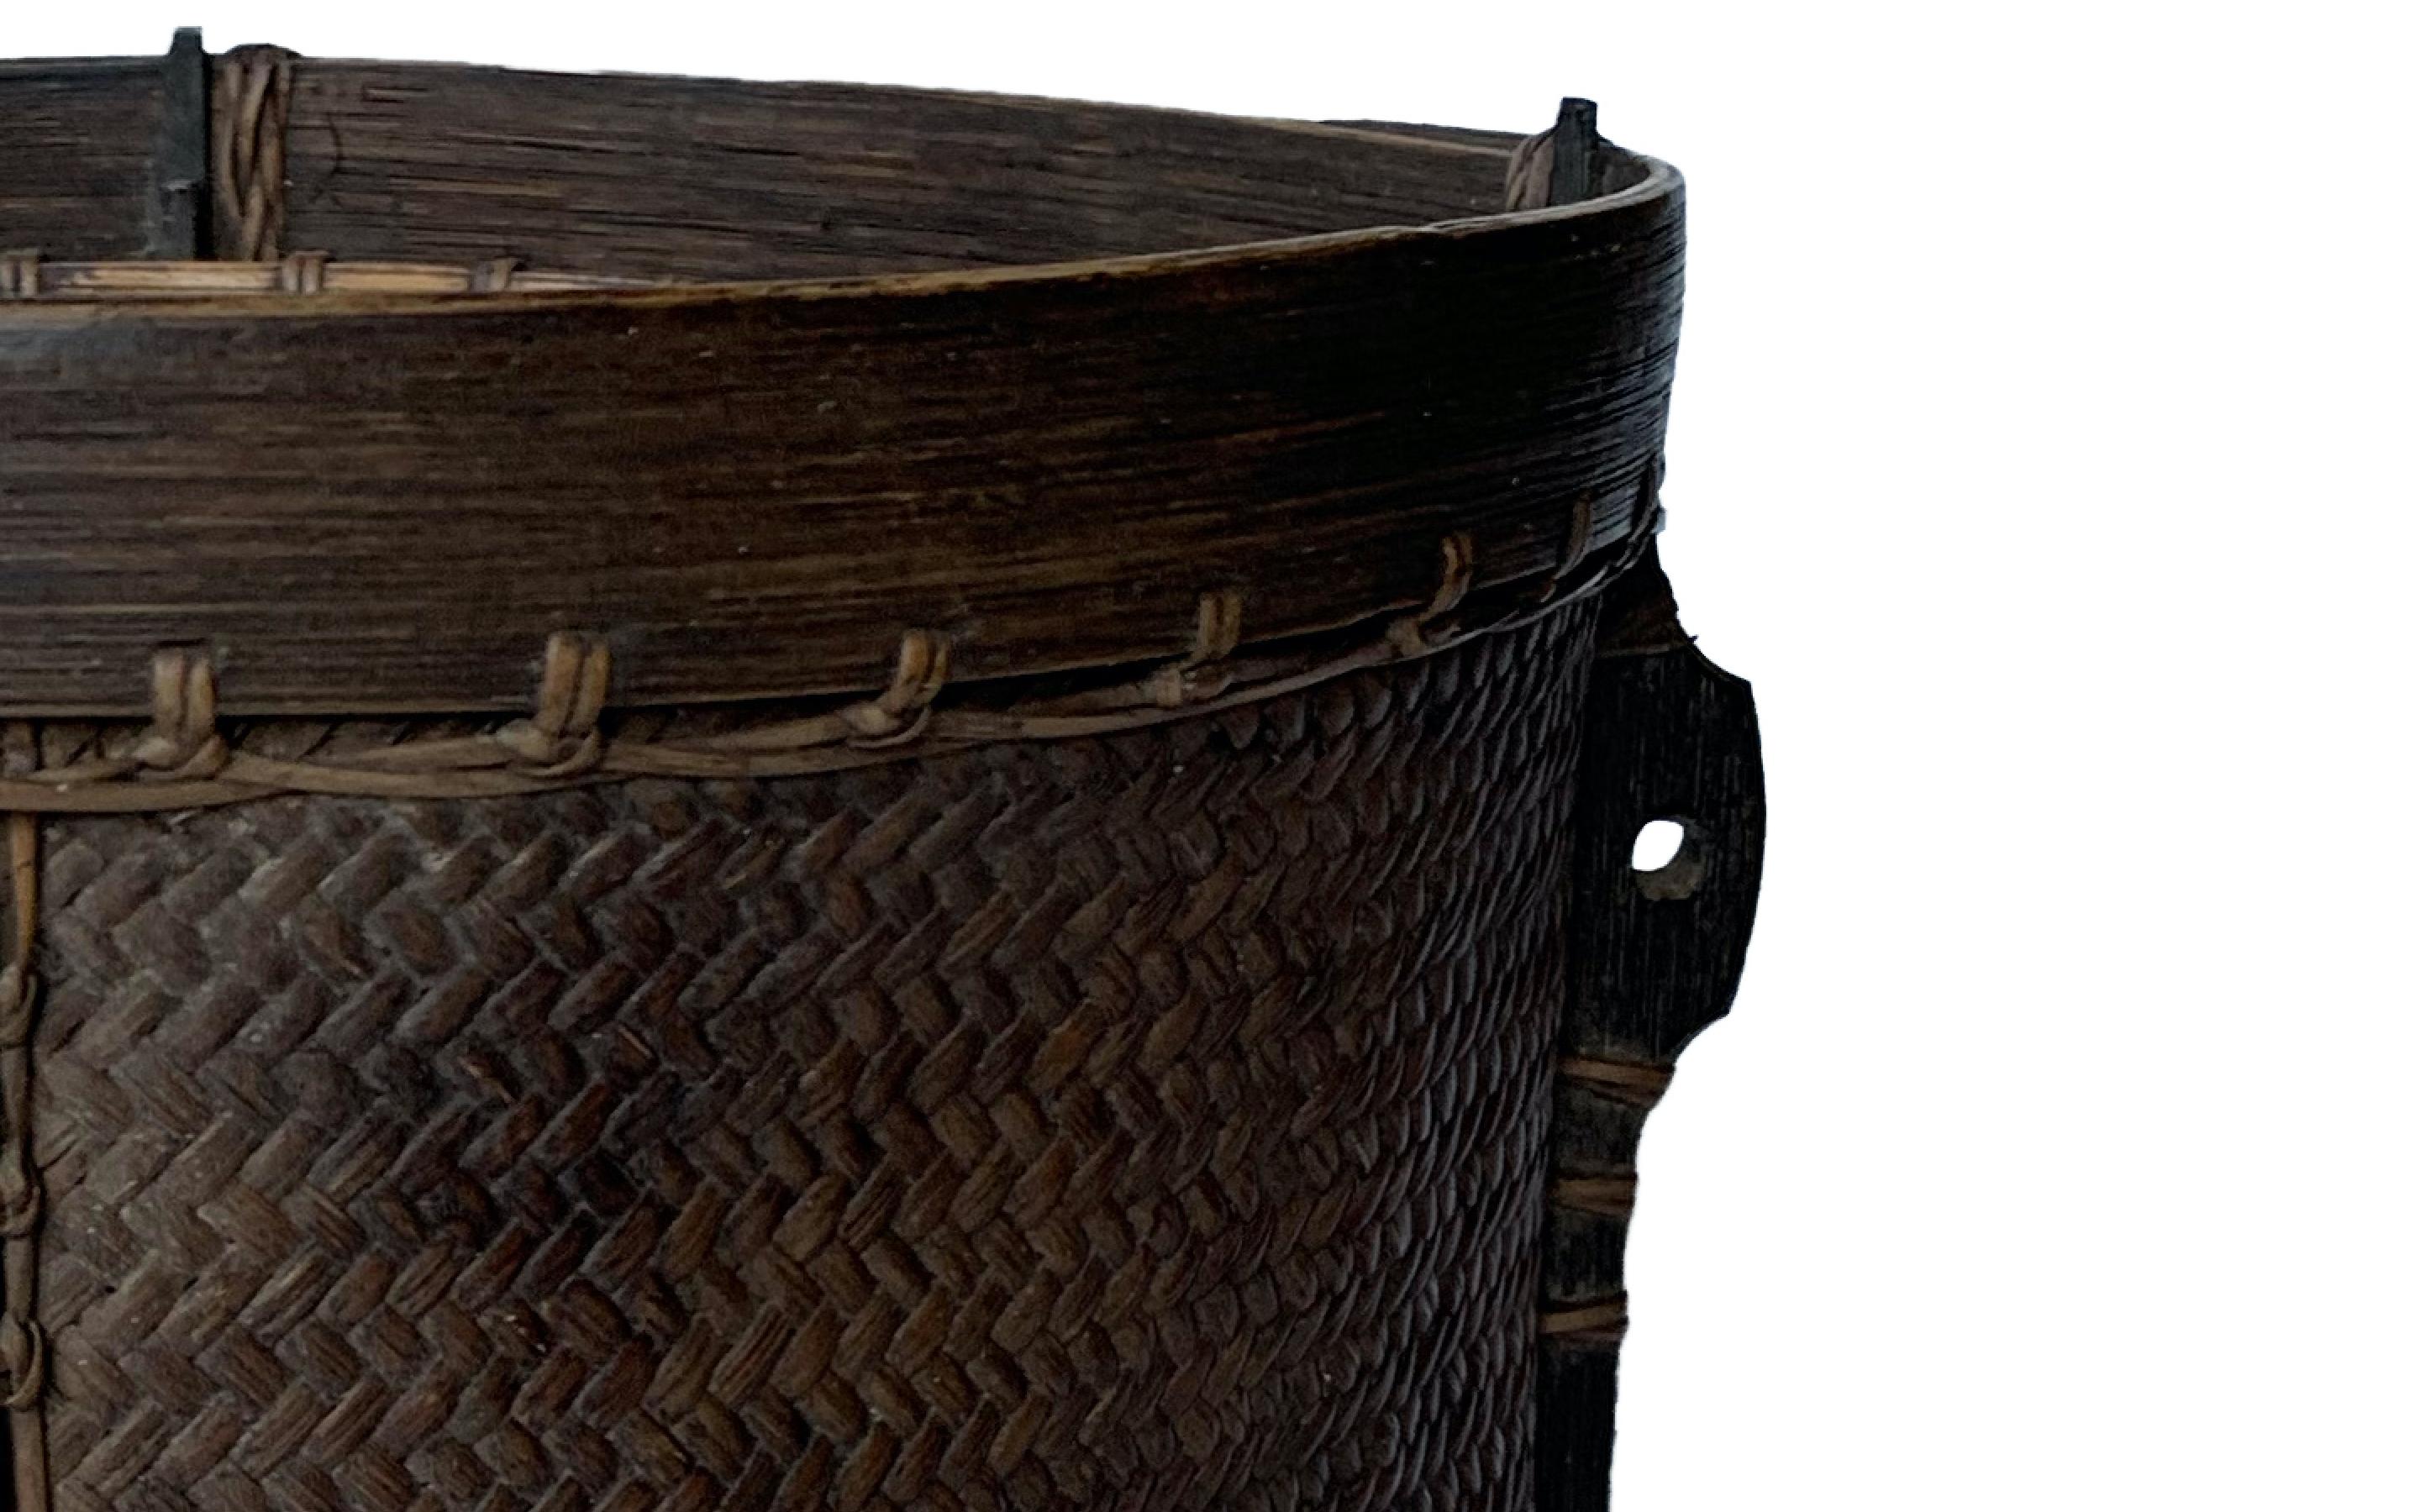 Other Rattan Basket Dayak Tribe Hand-Woven from Kalimantan, Borneo, Mid 20th Century For Sale